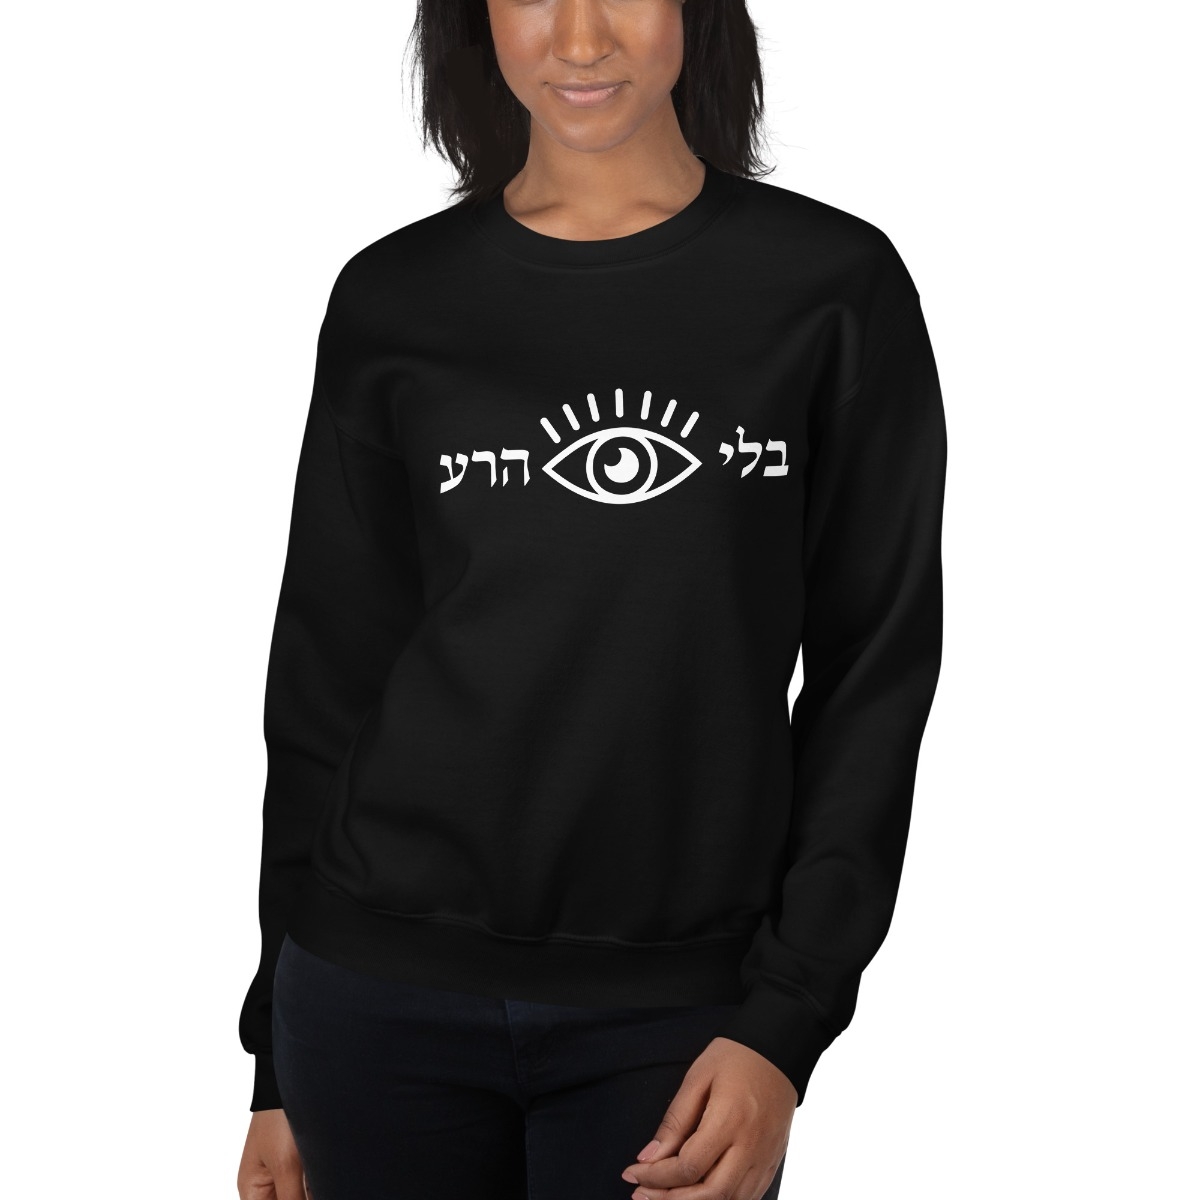 Without The Evil Eye (Hebrew) Sweatshirt (Choice of Colors) - 1